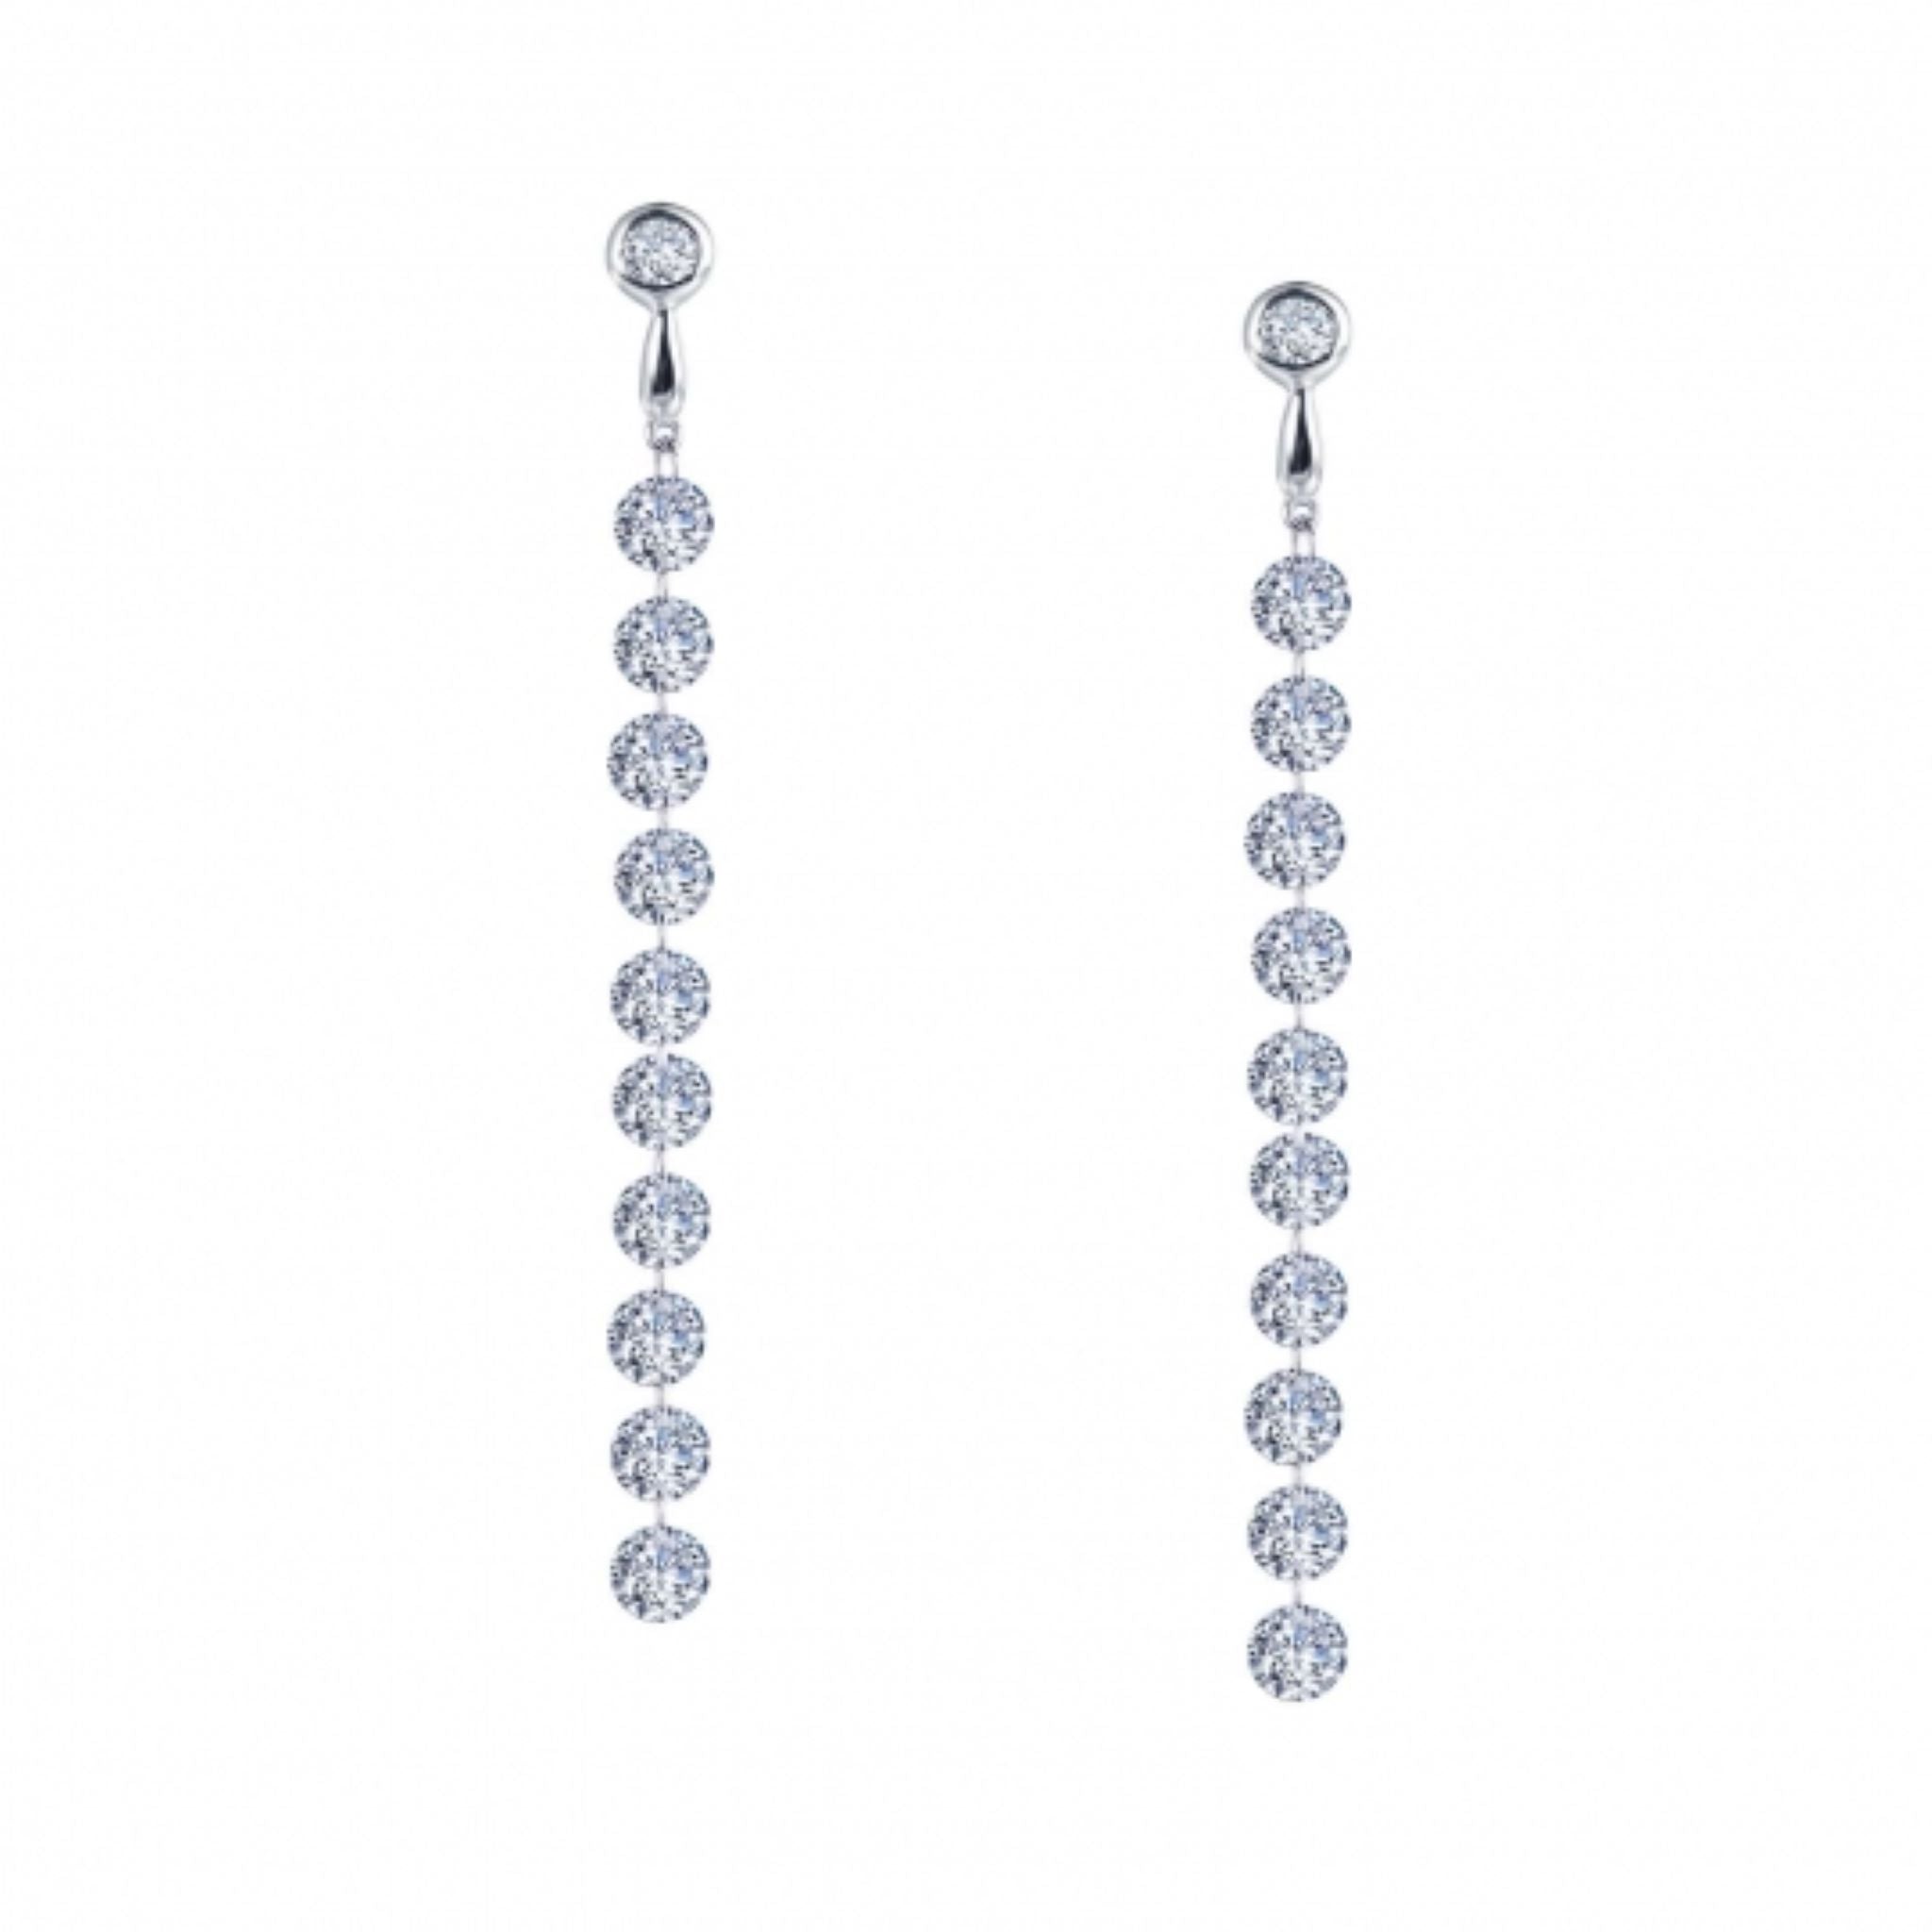 Blossom' White Cut Tassel Drop Earrings – The Royal Look For Less